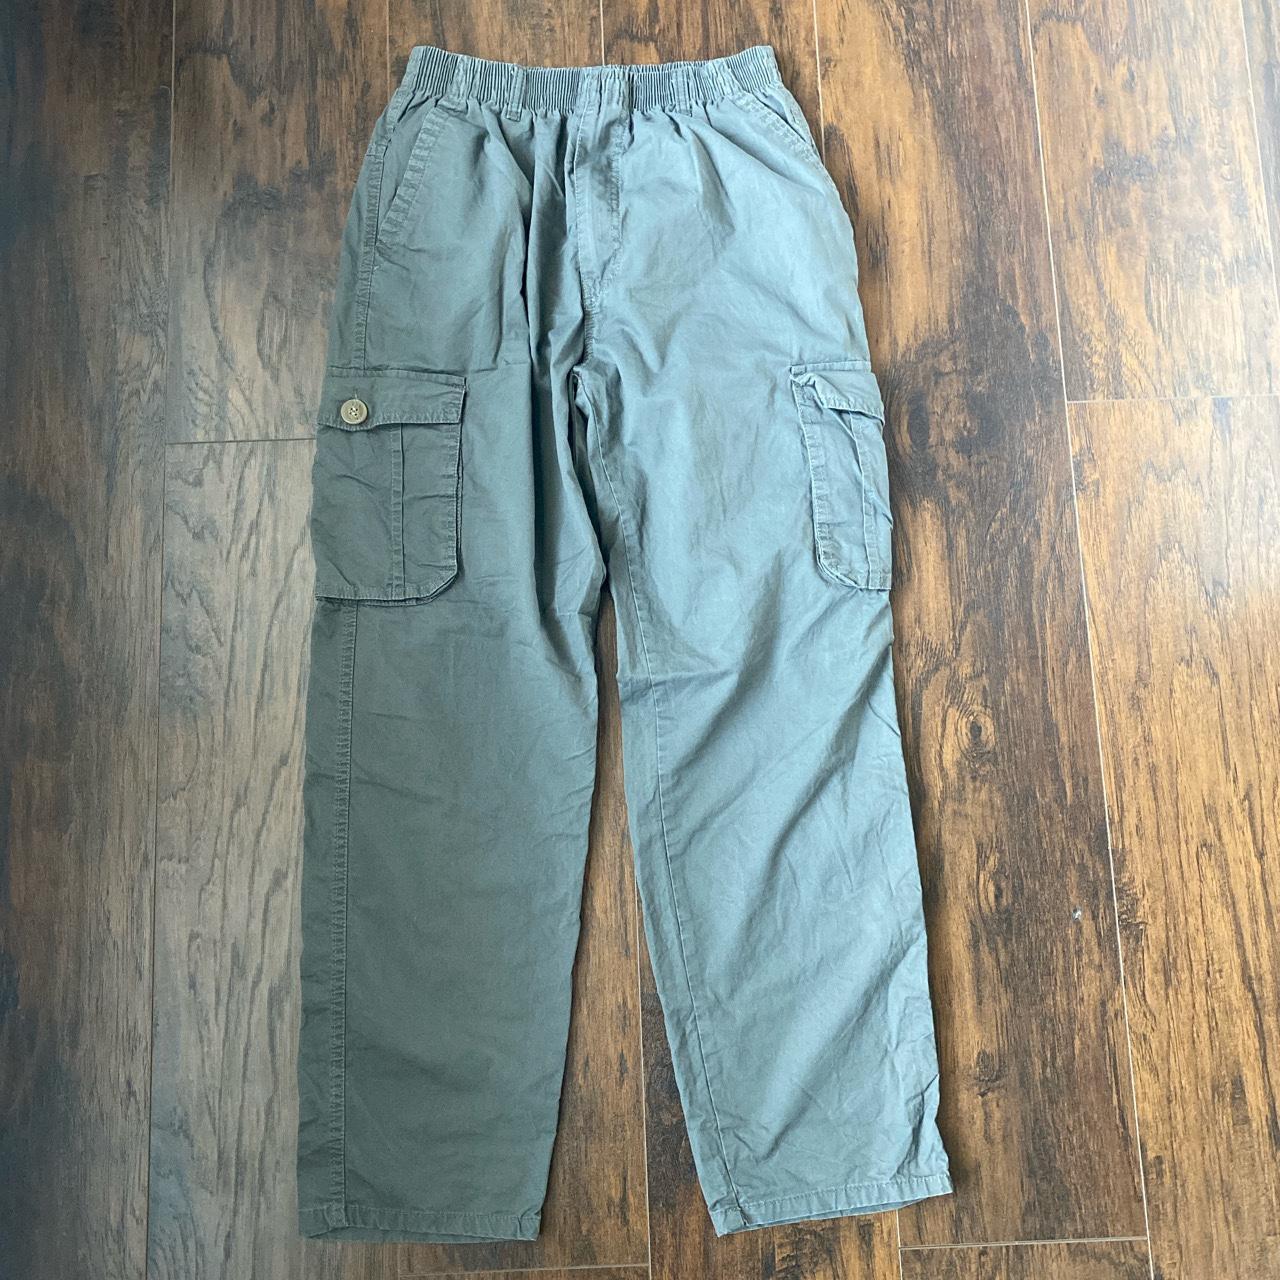 depop payments only! grey baggy cargos fit like a... - Depop